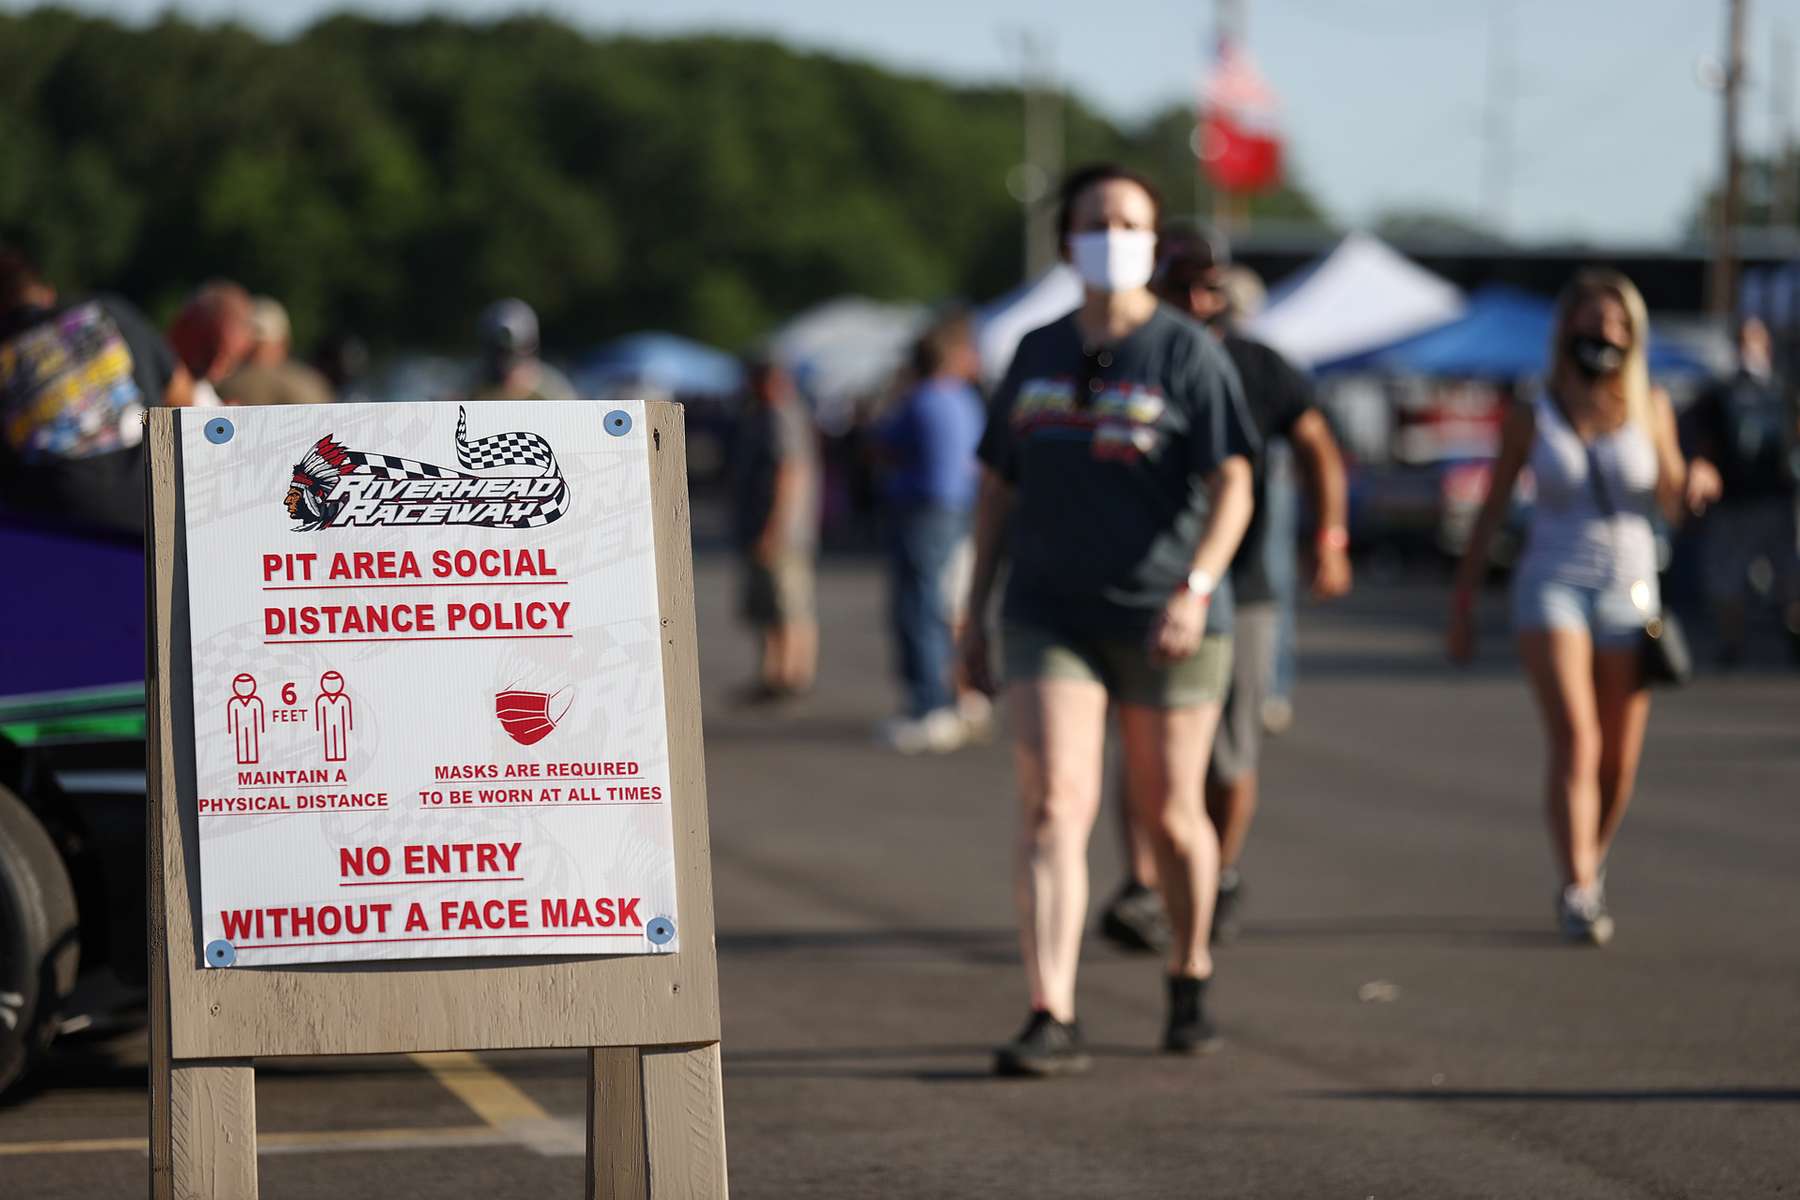 A sign is displayed promoting wearing a face mask and social distancing during NASCAR Advance Auto Series Opening Night  at Riverhead Raceway on August 01, 2020 in Riverhead, New York.  The race track had been closed due to the coronavirus COVID-19 pandemic.  More than 4,585,258 people in the United States alone have been infected with the coronavirus and at least 154,000 have died. 